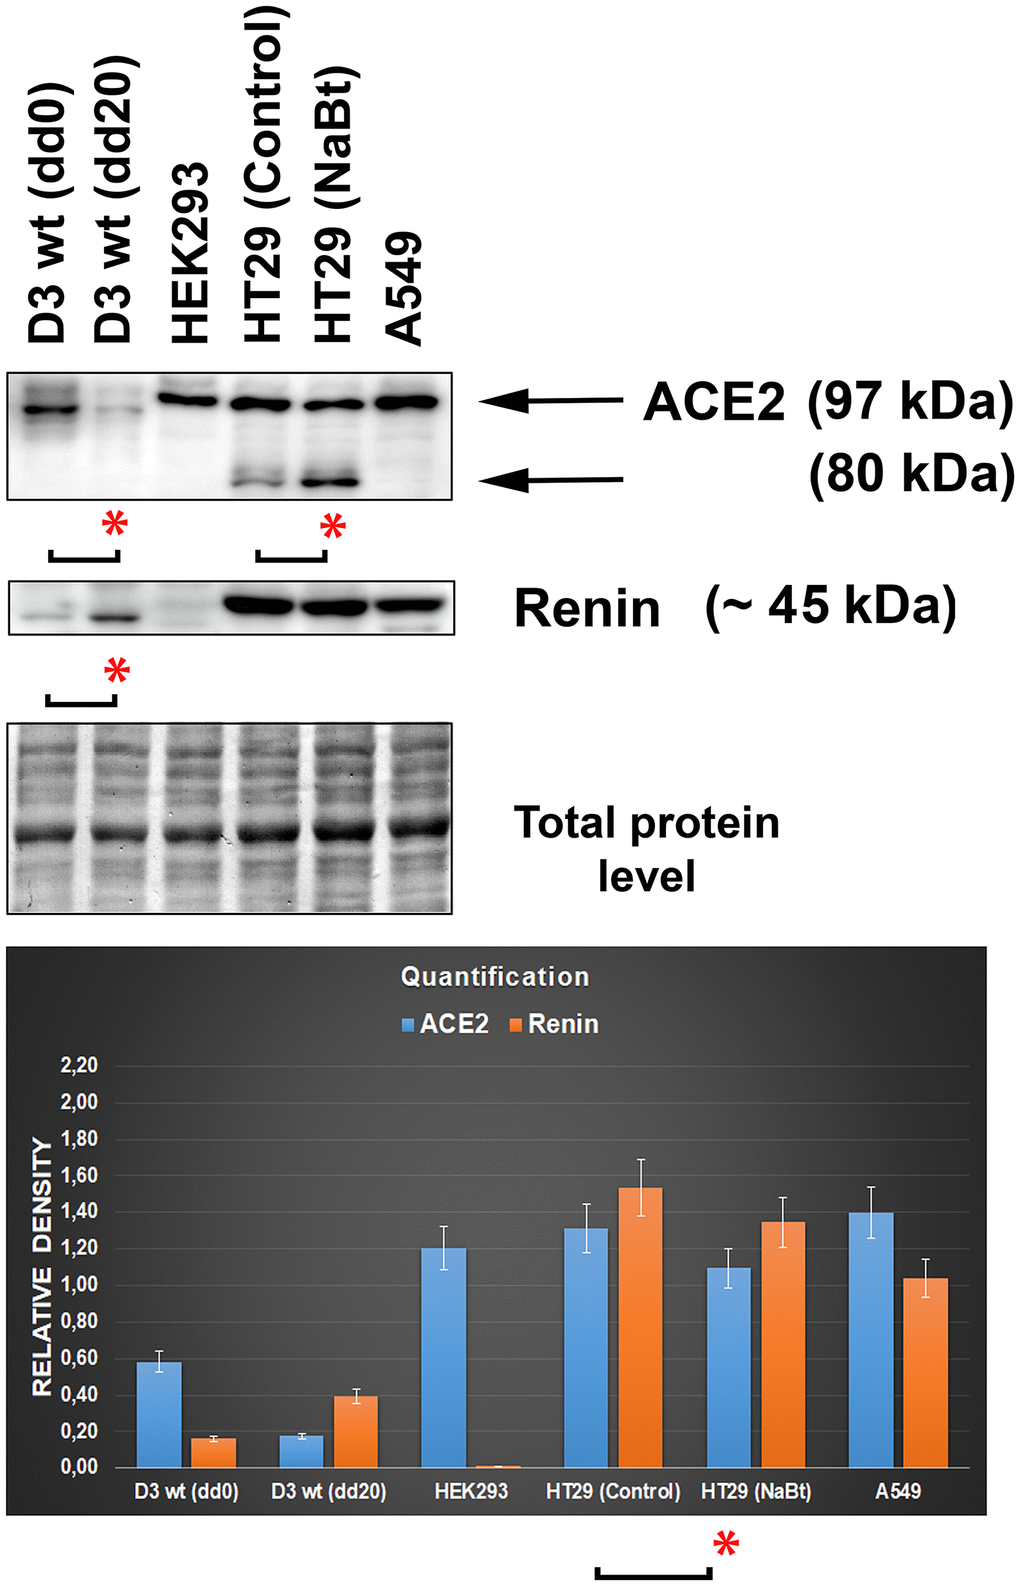 Levels of the ACE2 and renin in distinct cell types. The analysis was performed in mouse embryonic stem cells (mESCs) differentiated into cardiomyocytes, human embryonic kidney cells HEK293, human intestinal adenocarcinoma HT29 cells (nontreated and differentiated using the HDAC inhibitor sodium butyrate [NaBt]), and human lung adenocarcinoma A549 cells. The asterisks show a statistically significant change in the protein levels. The nonparametric Mann–Whitney test (STATISTICA software) was applied for the analysis; data with an asterisk show statistically significant differences between the tested samples (α=0.05).